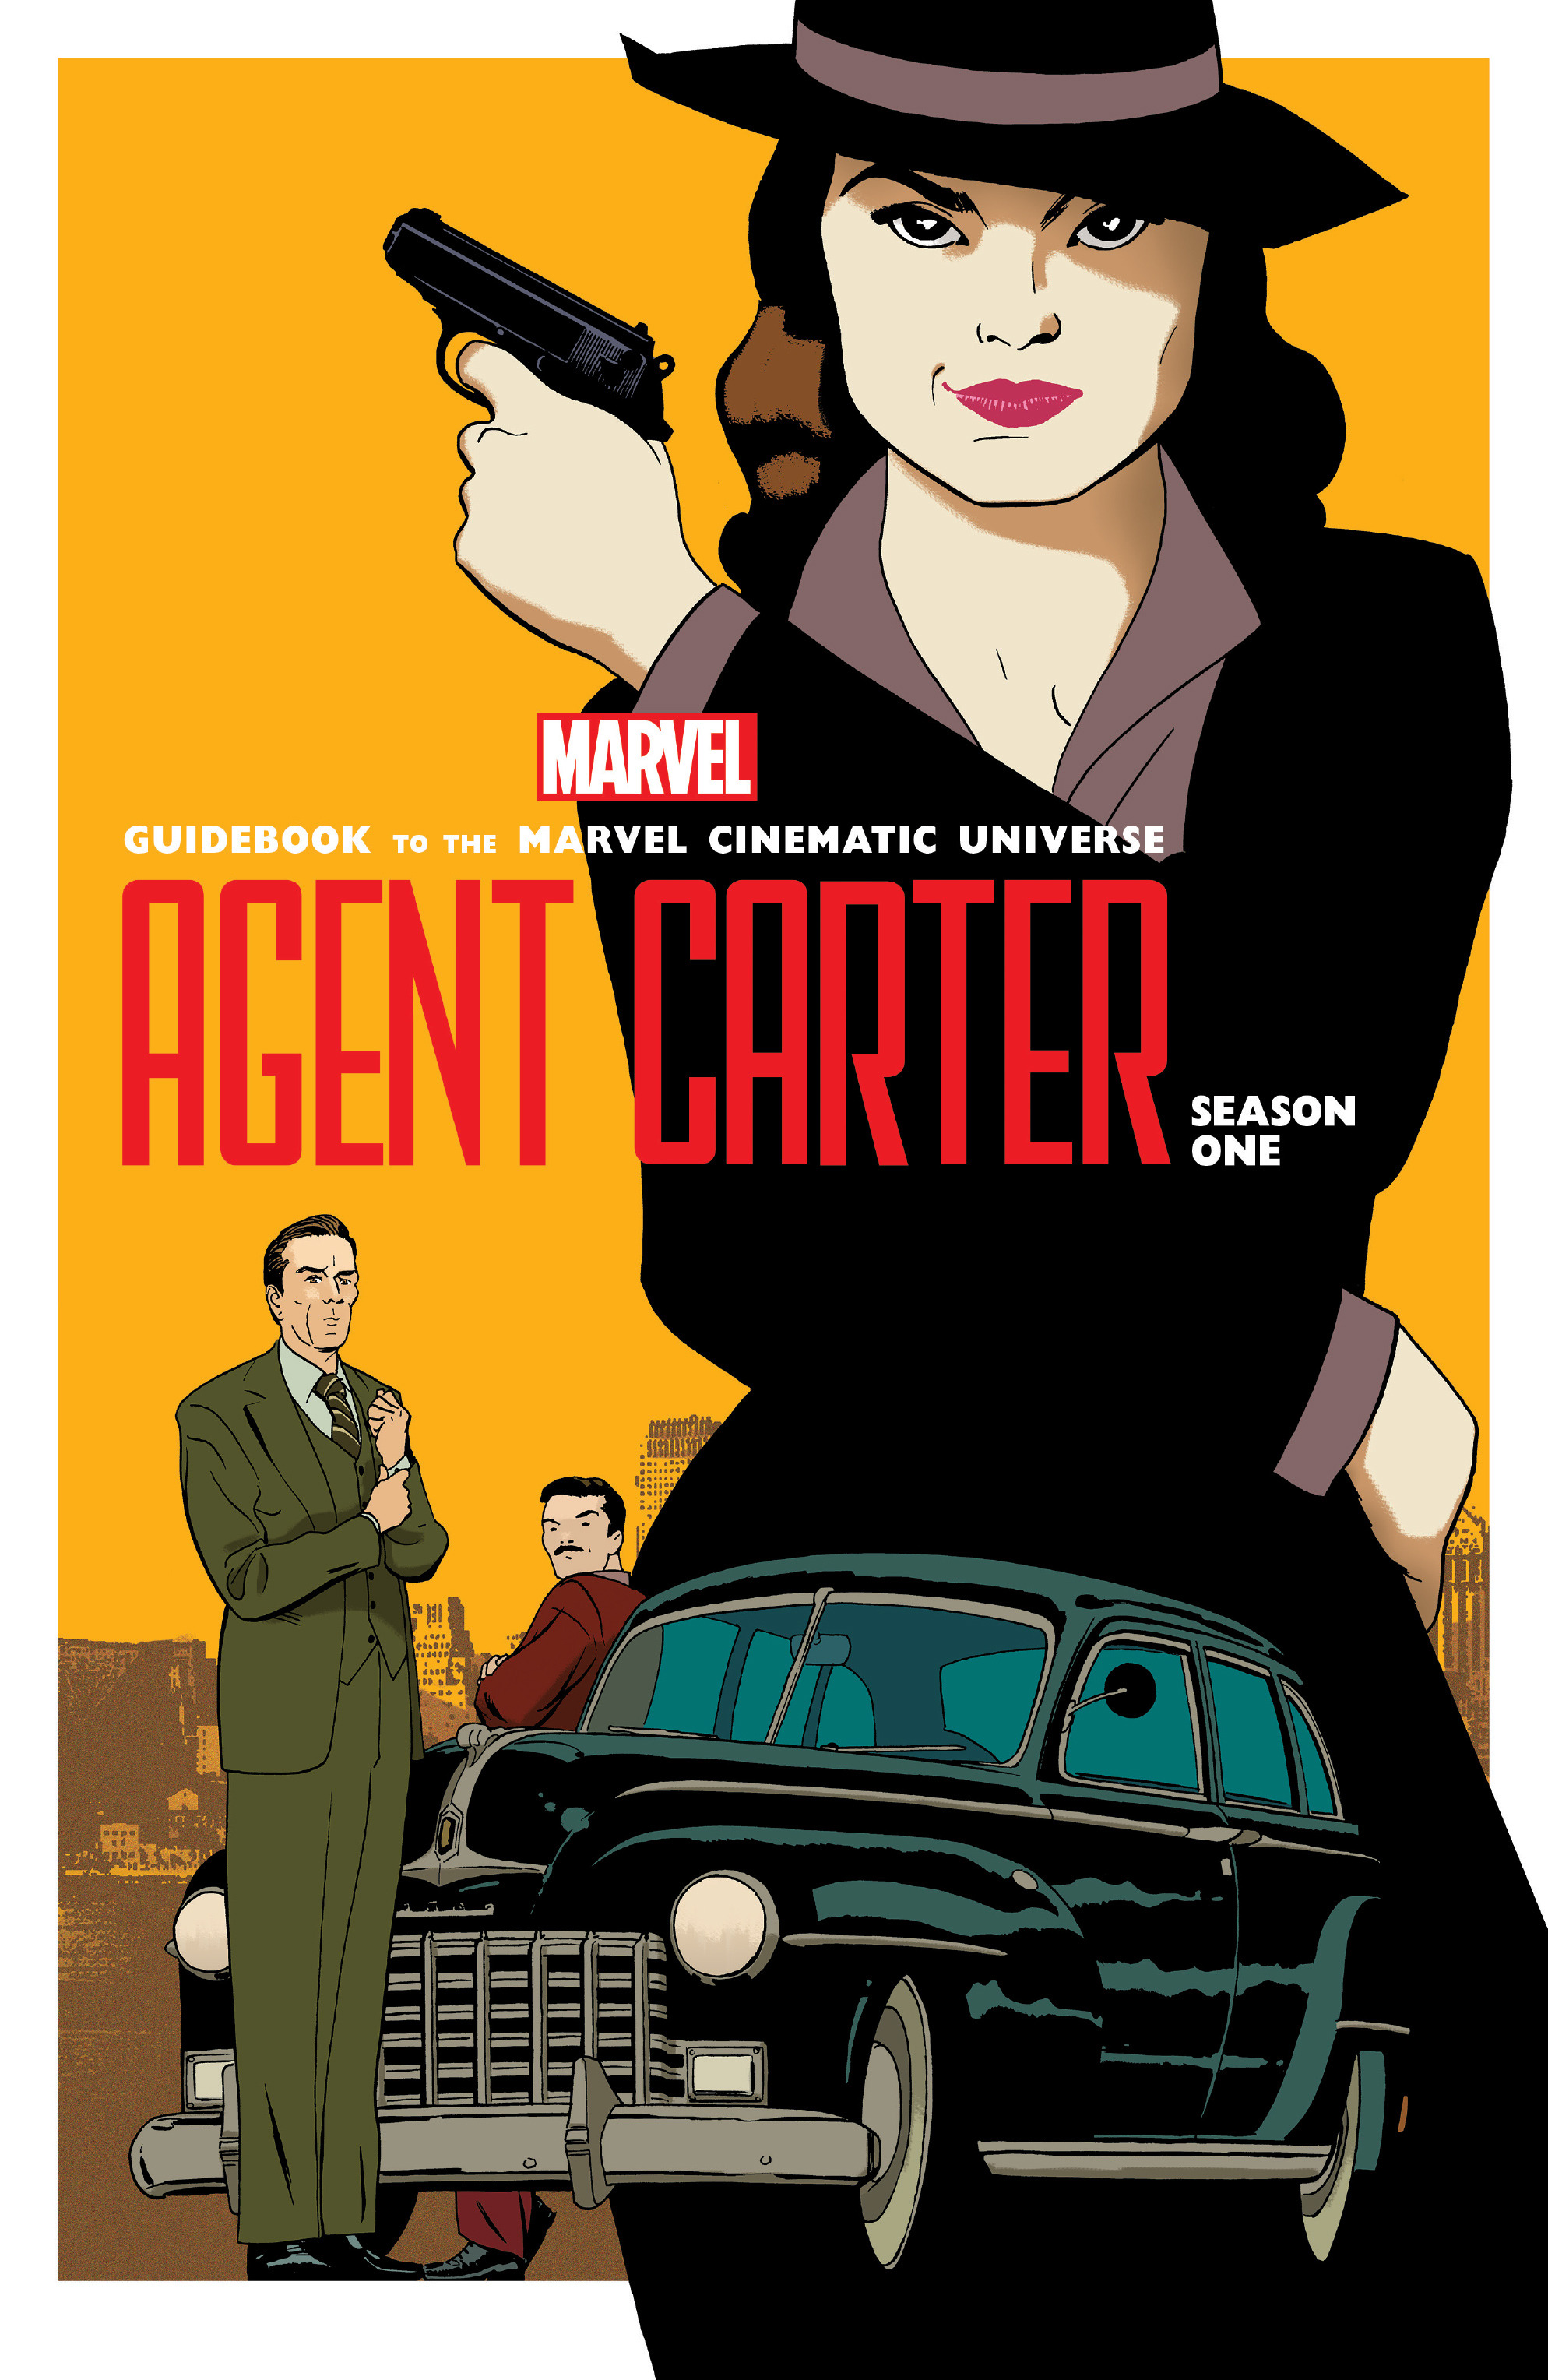 Read online Guidebook to the Marvel Cinematic Universe - Marvel's Agent Carter Season One comic -  Issue # Full - 1